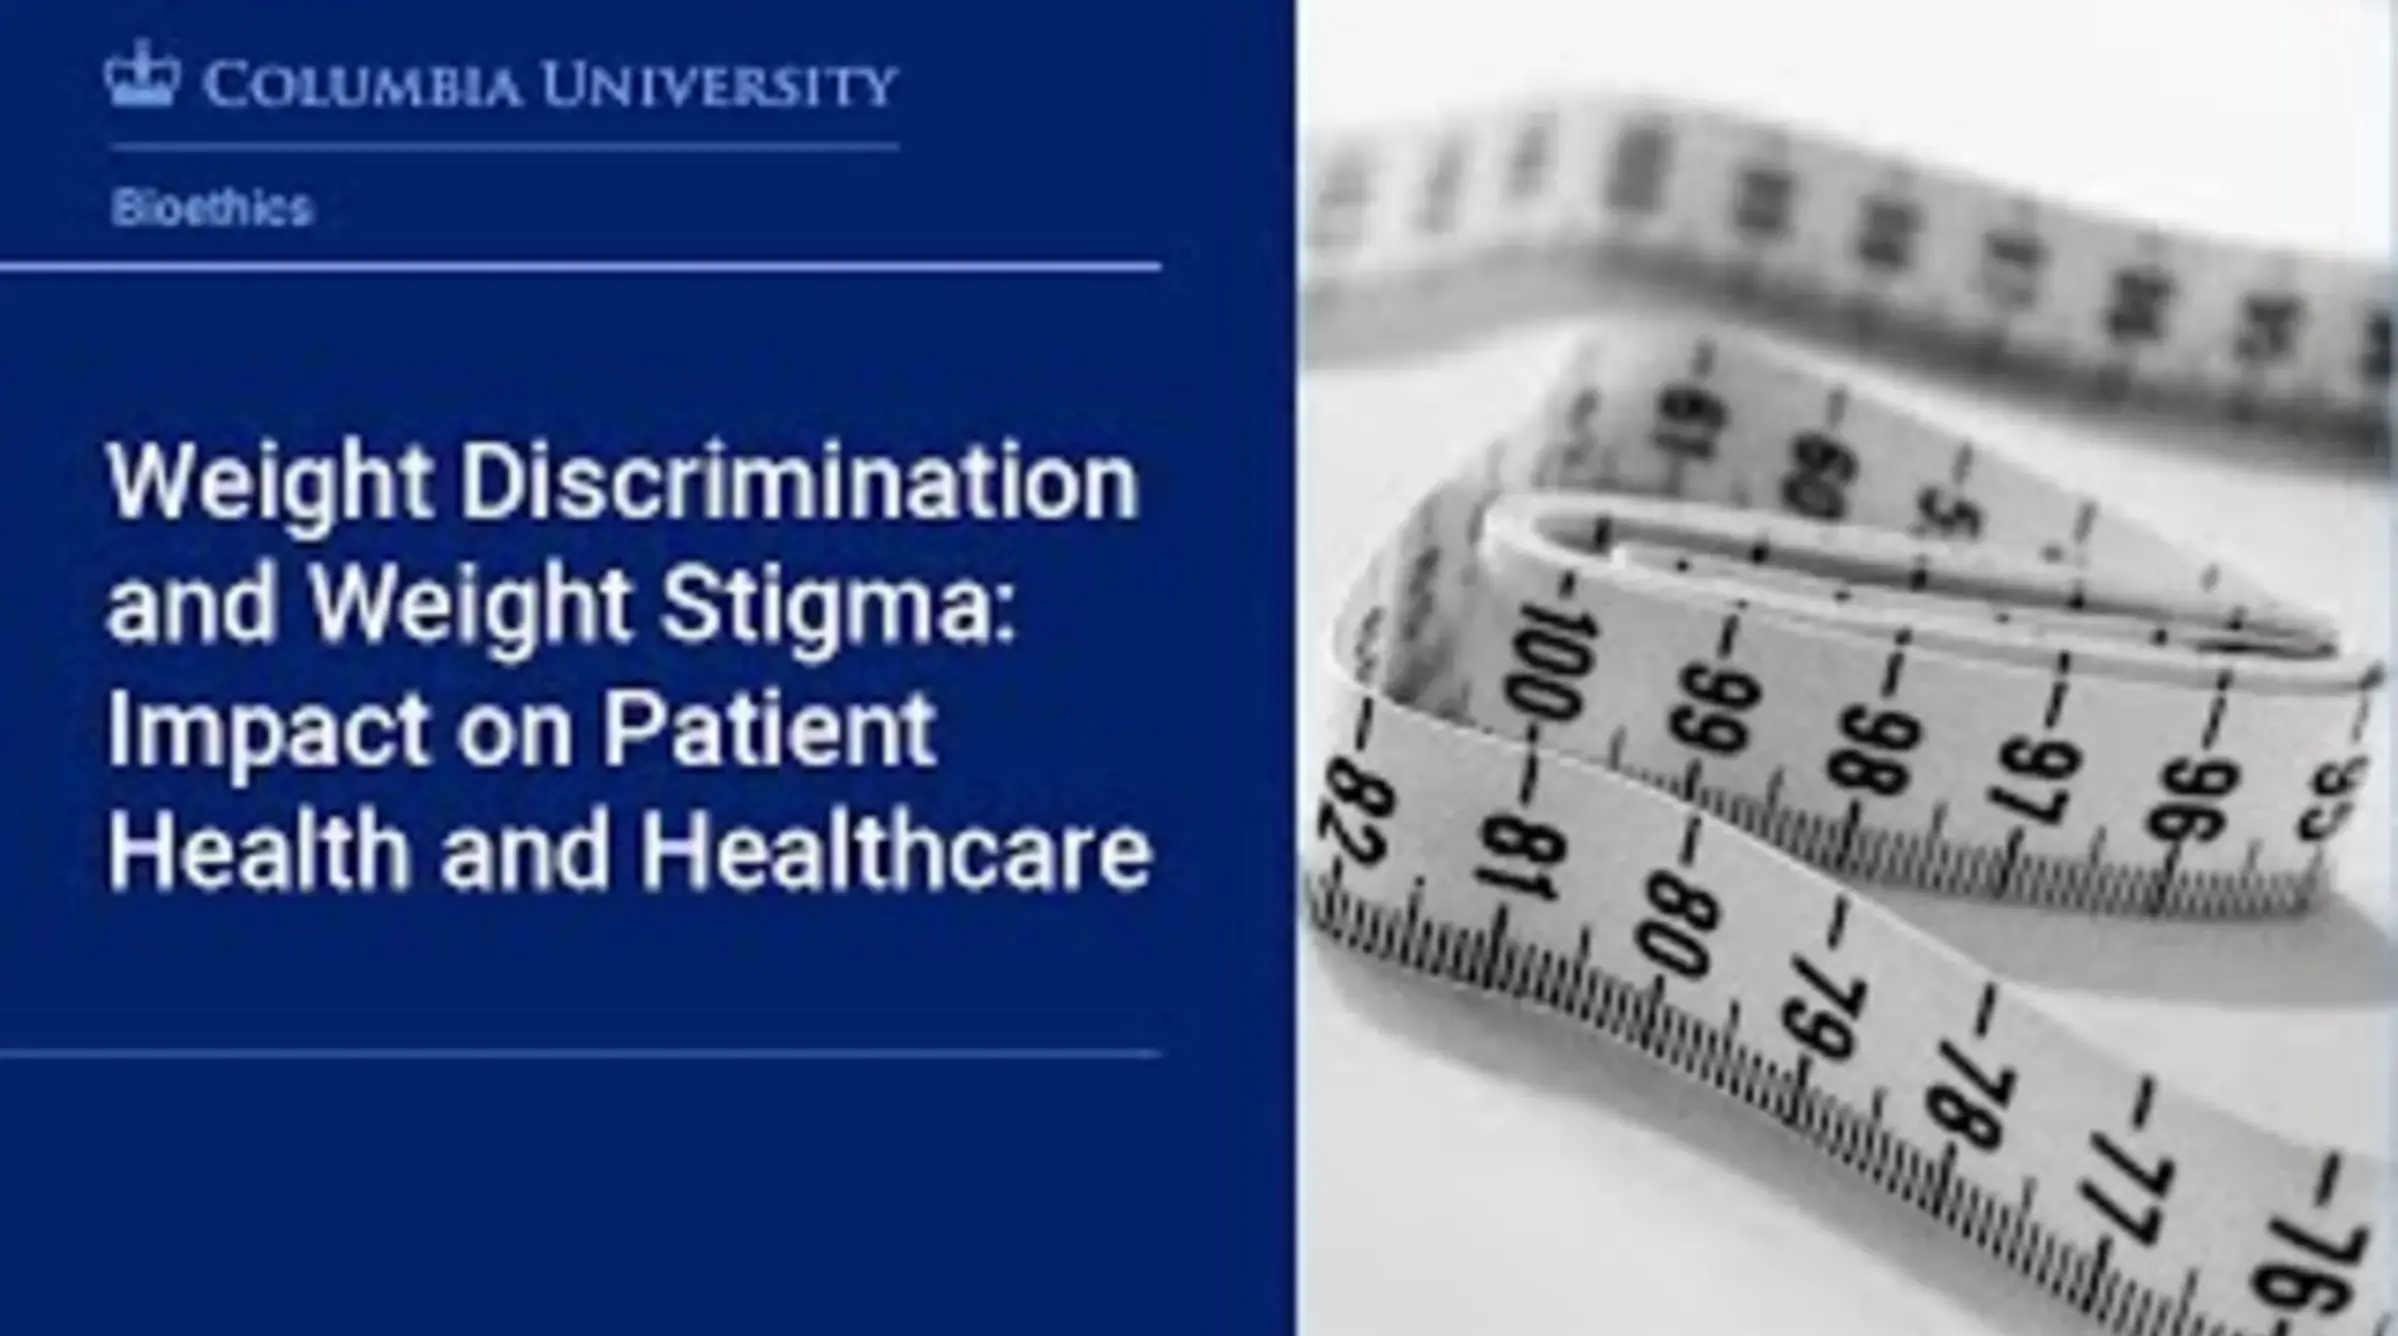 Weight Discrimination and Weight Stigma: Impact on Patient Health and Healthcare